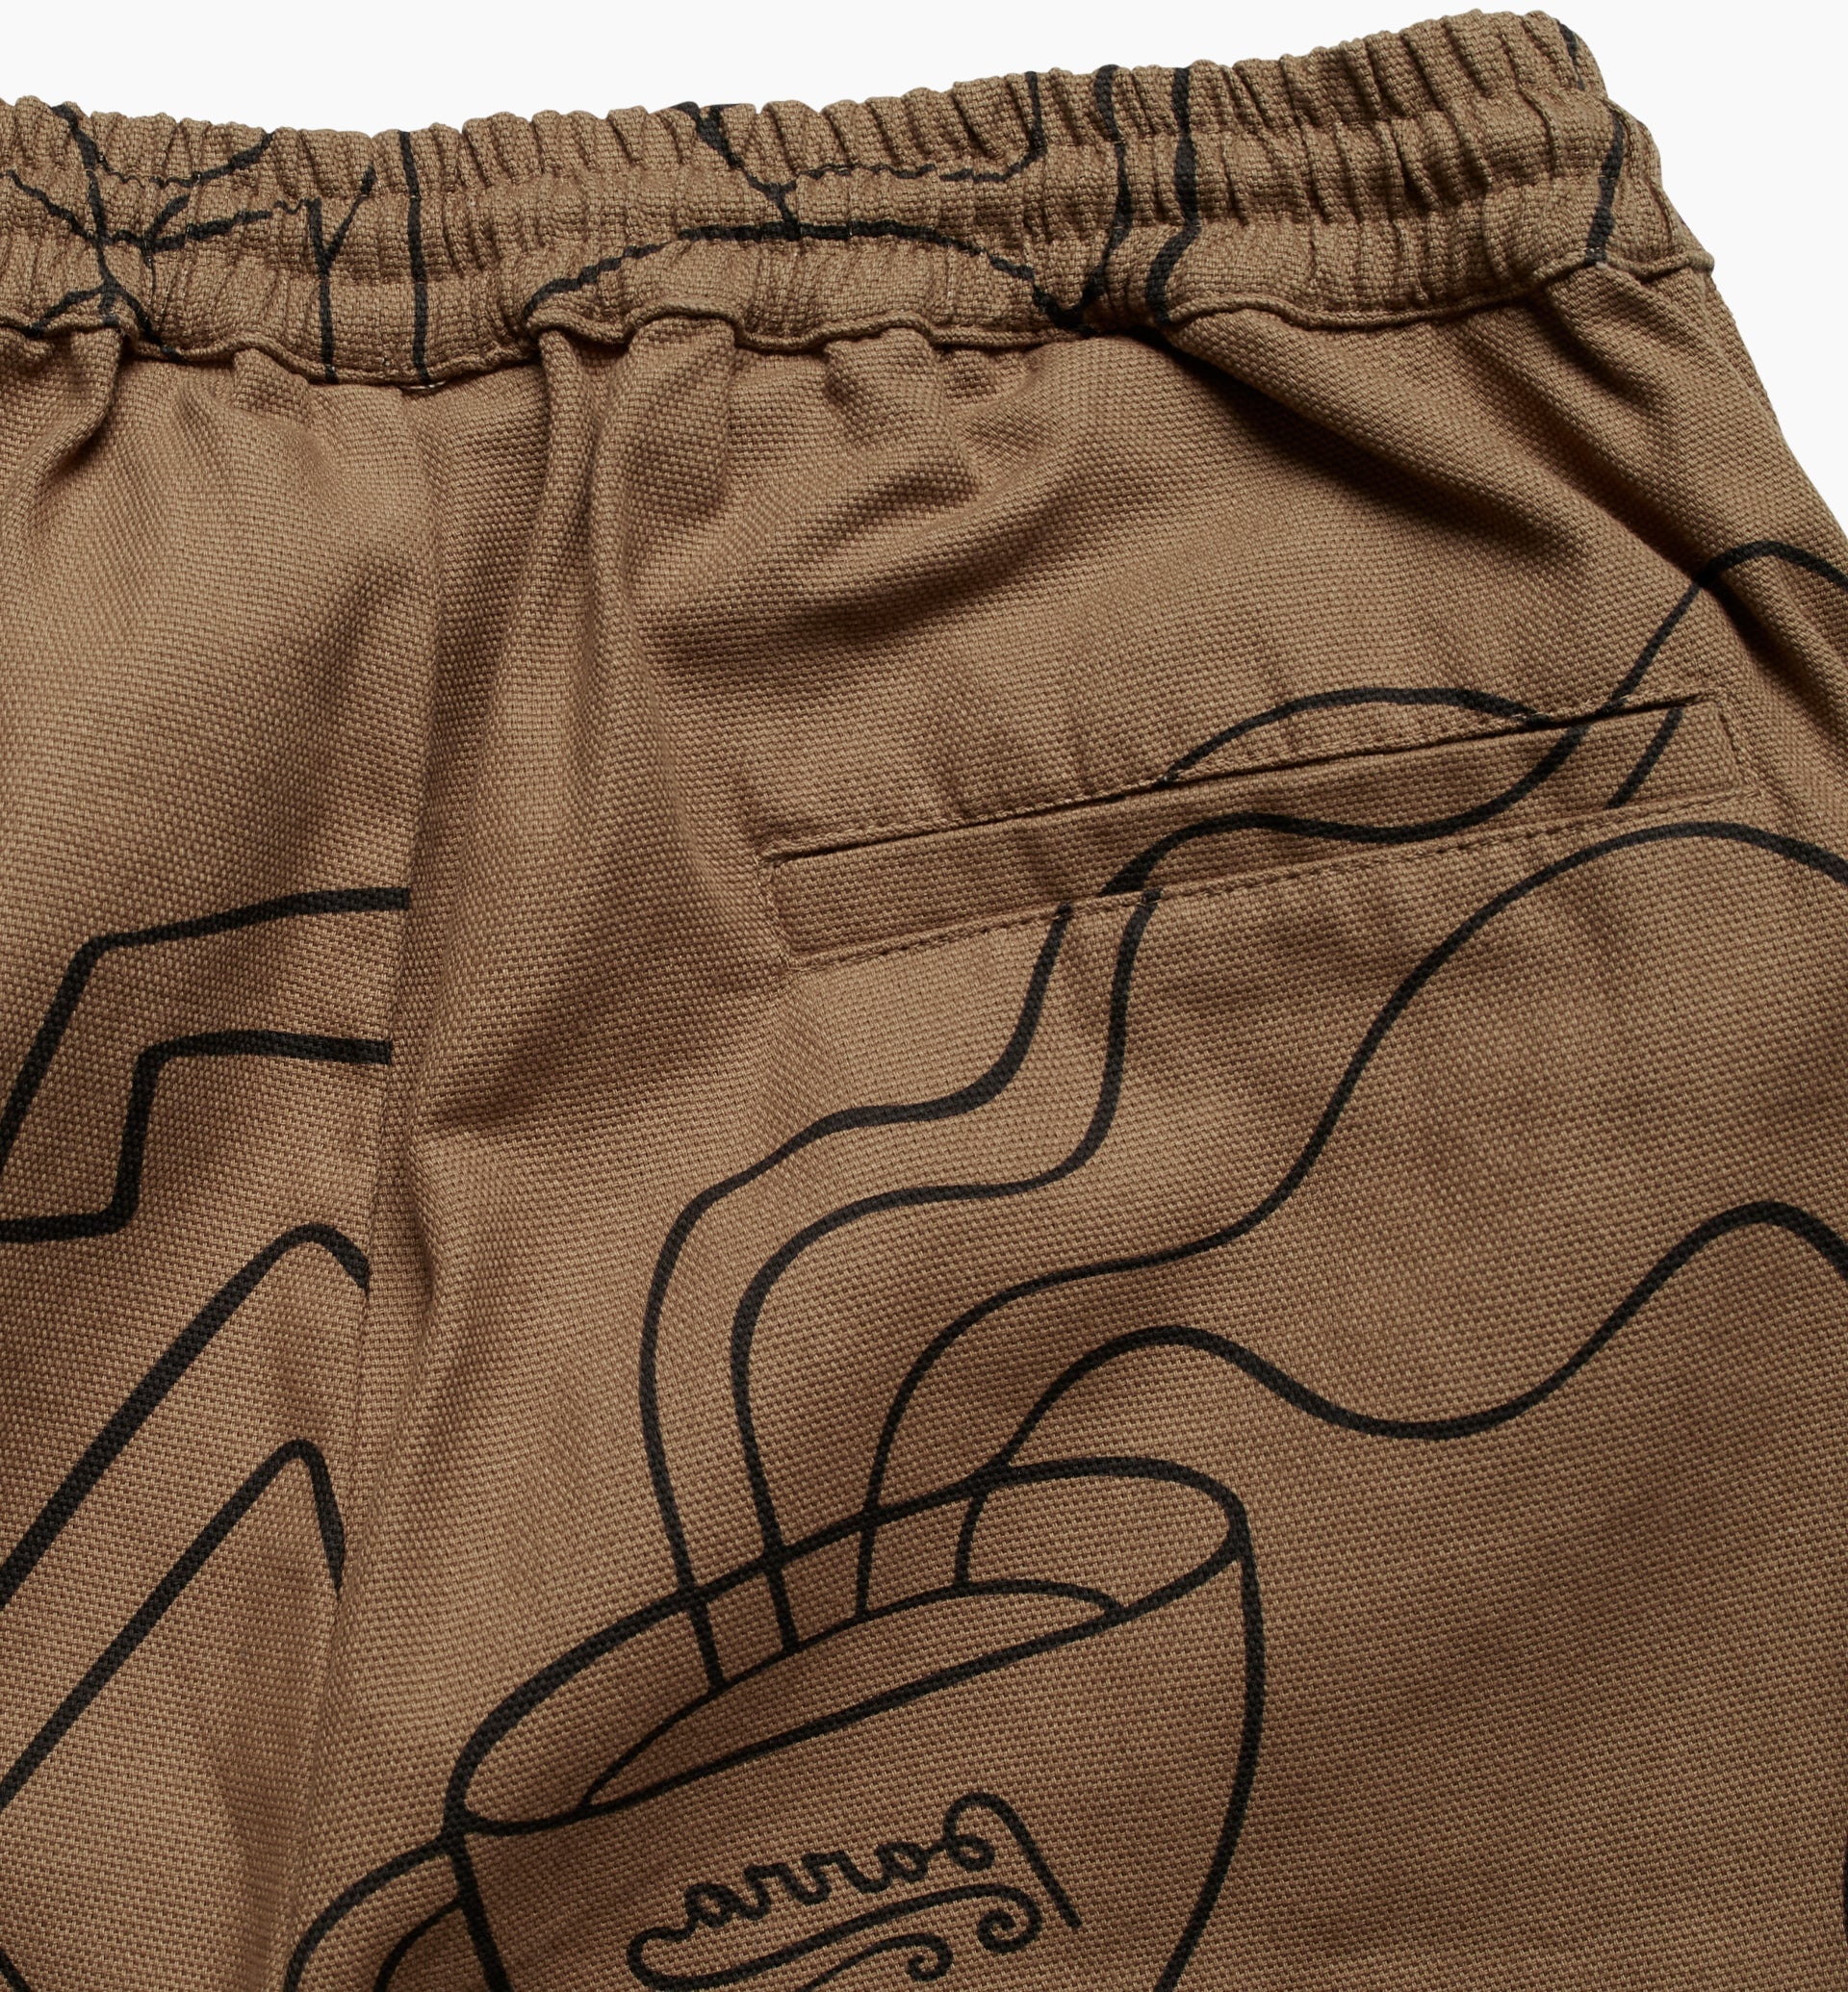 Parra - experience life worker pants